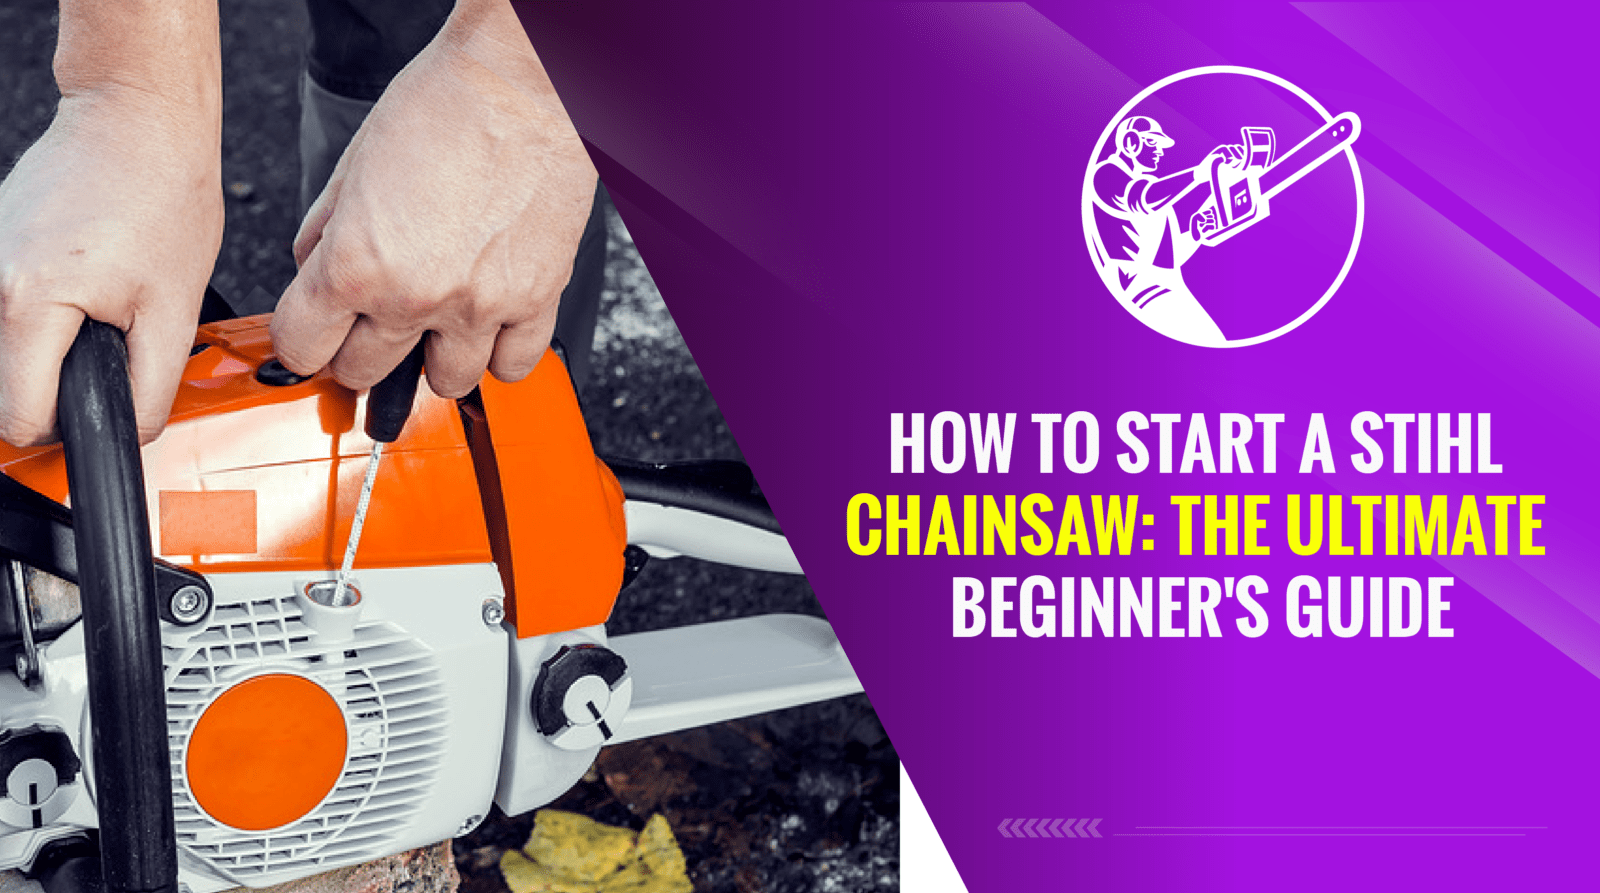 How to Start a Stihl Chainsaw: The Ultimate Beginner’s Guide